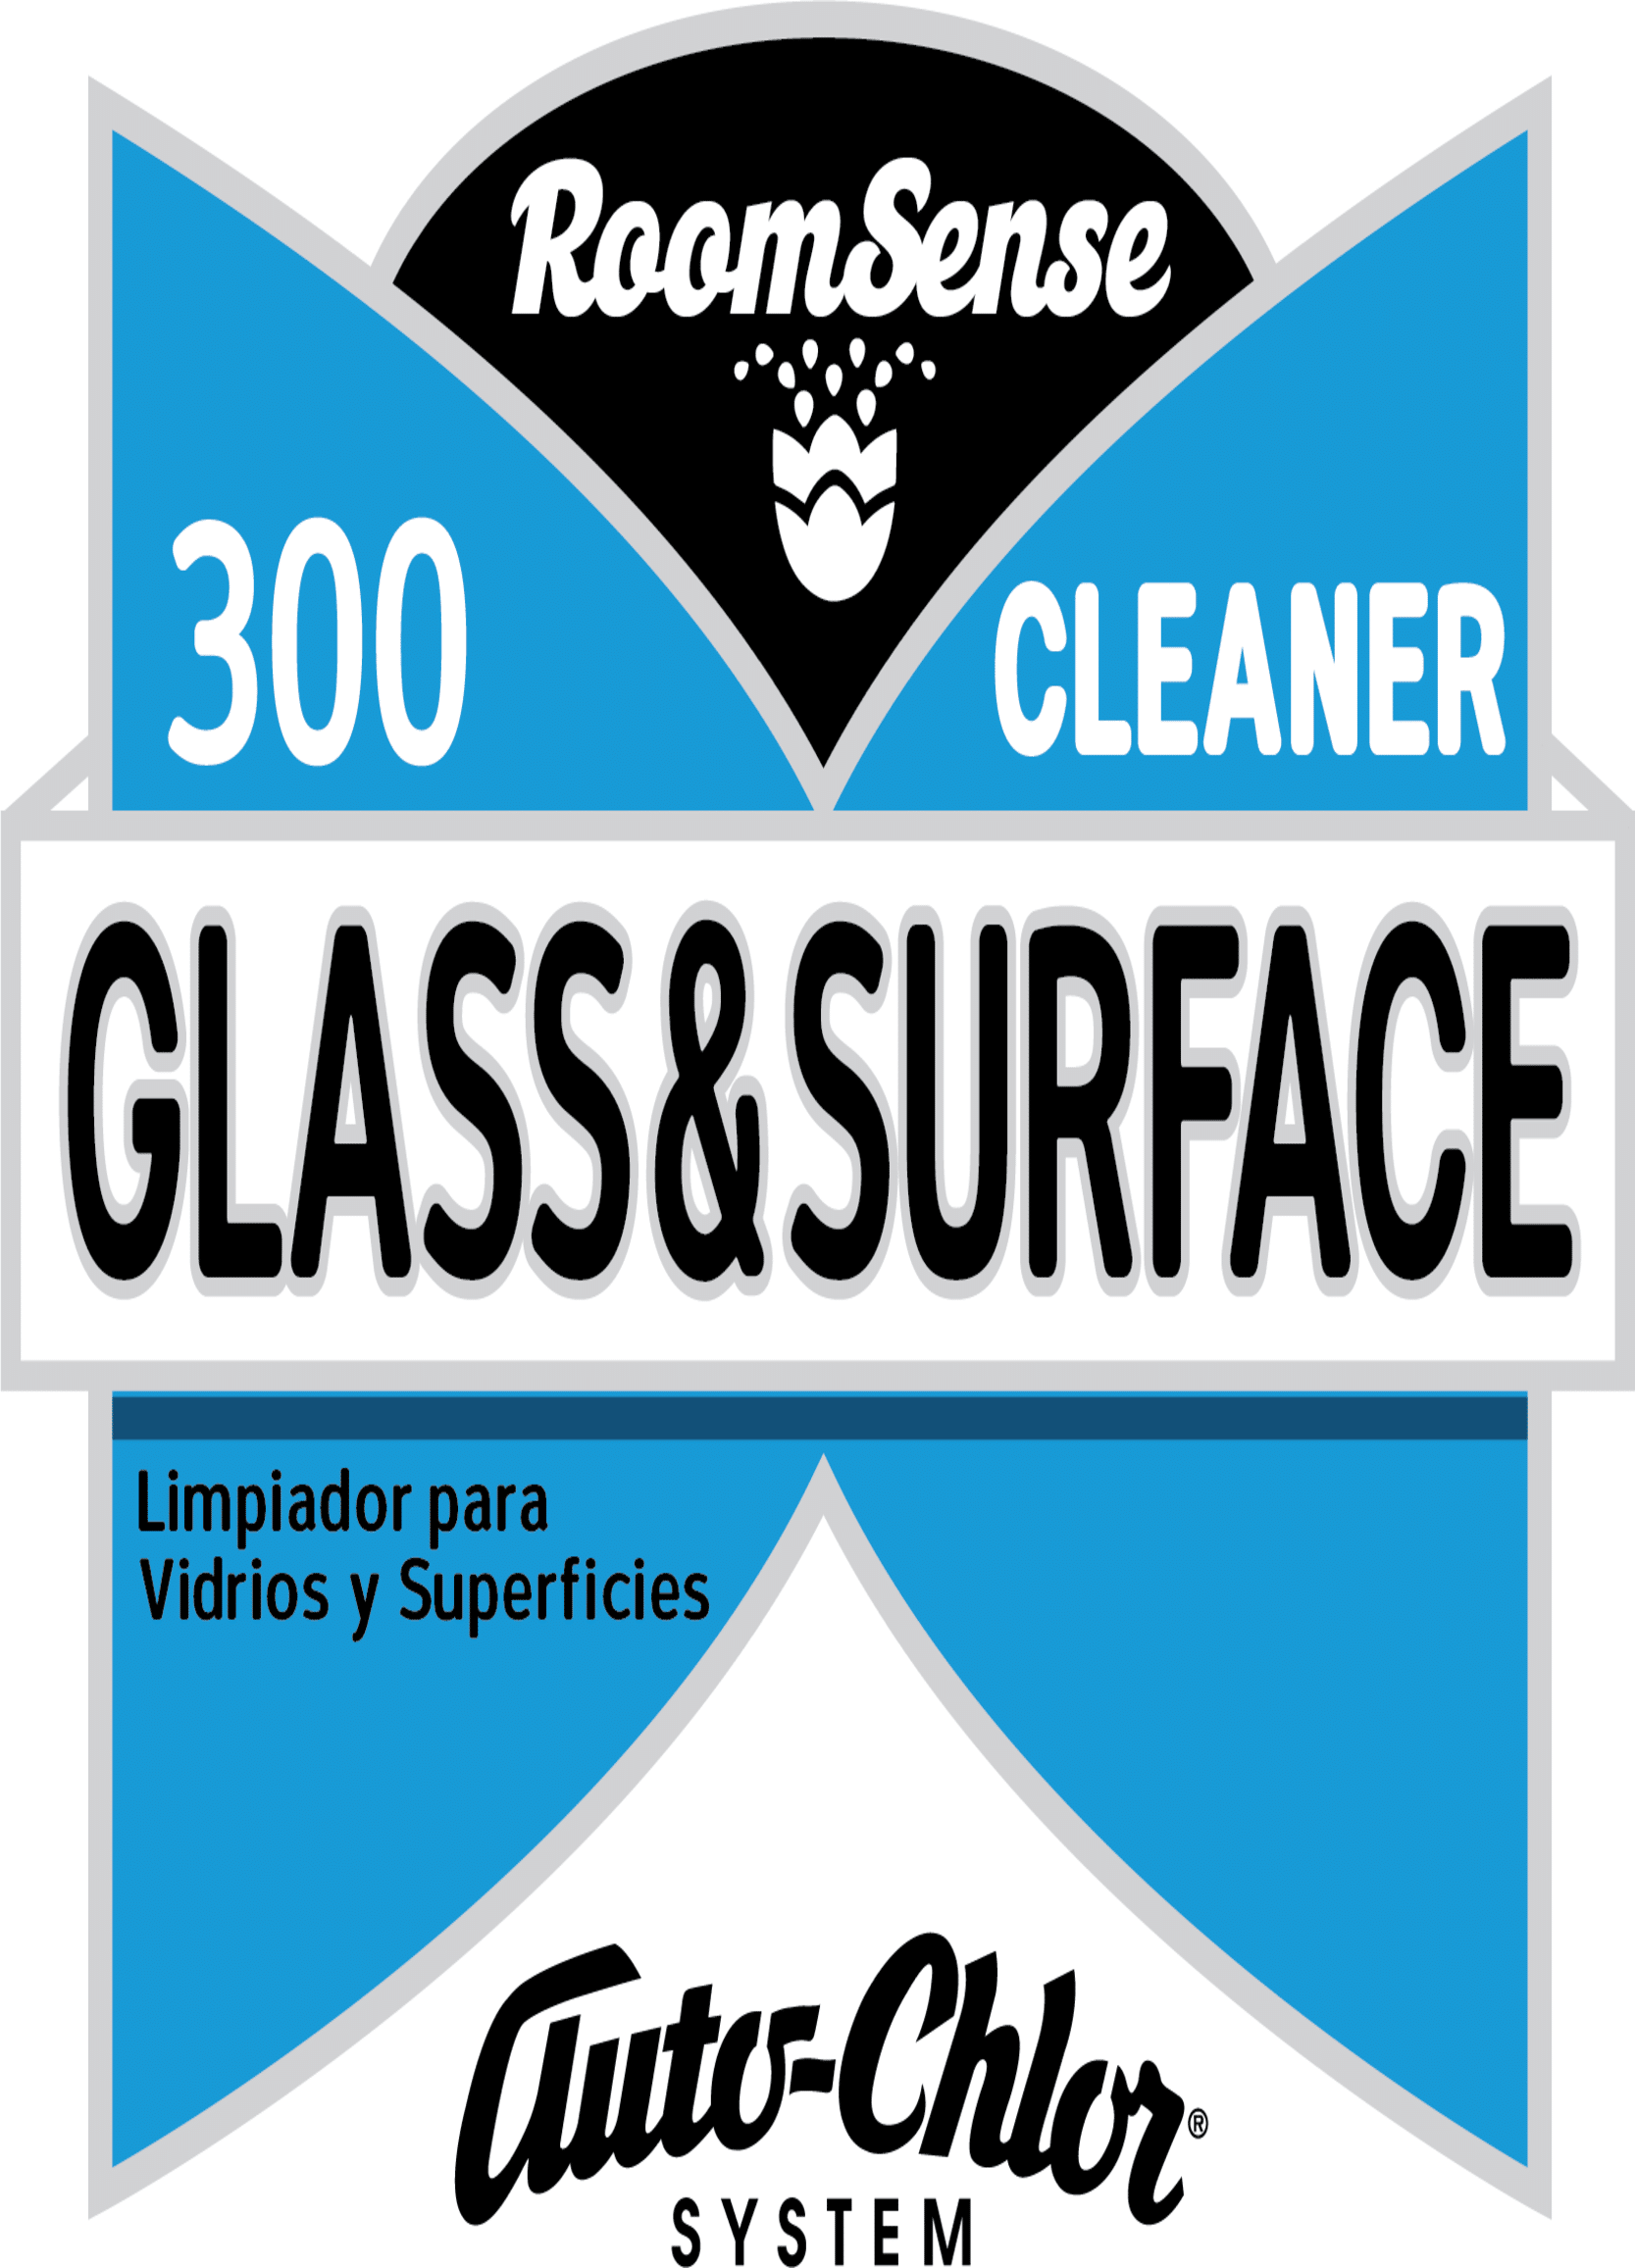 https://eadn-wc04-920528.nxedge.io/wp-content/uploads/2023/05/Roomsense-300-Glass-Surface-Cleaner-1.png